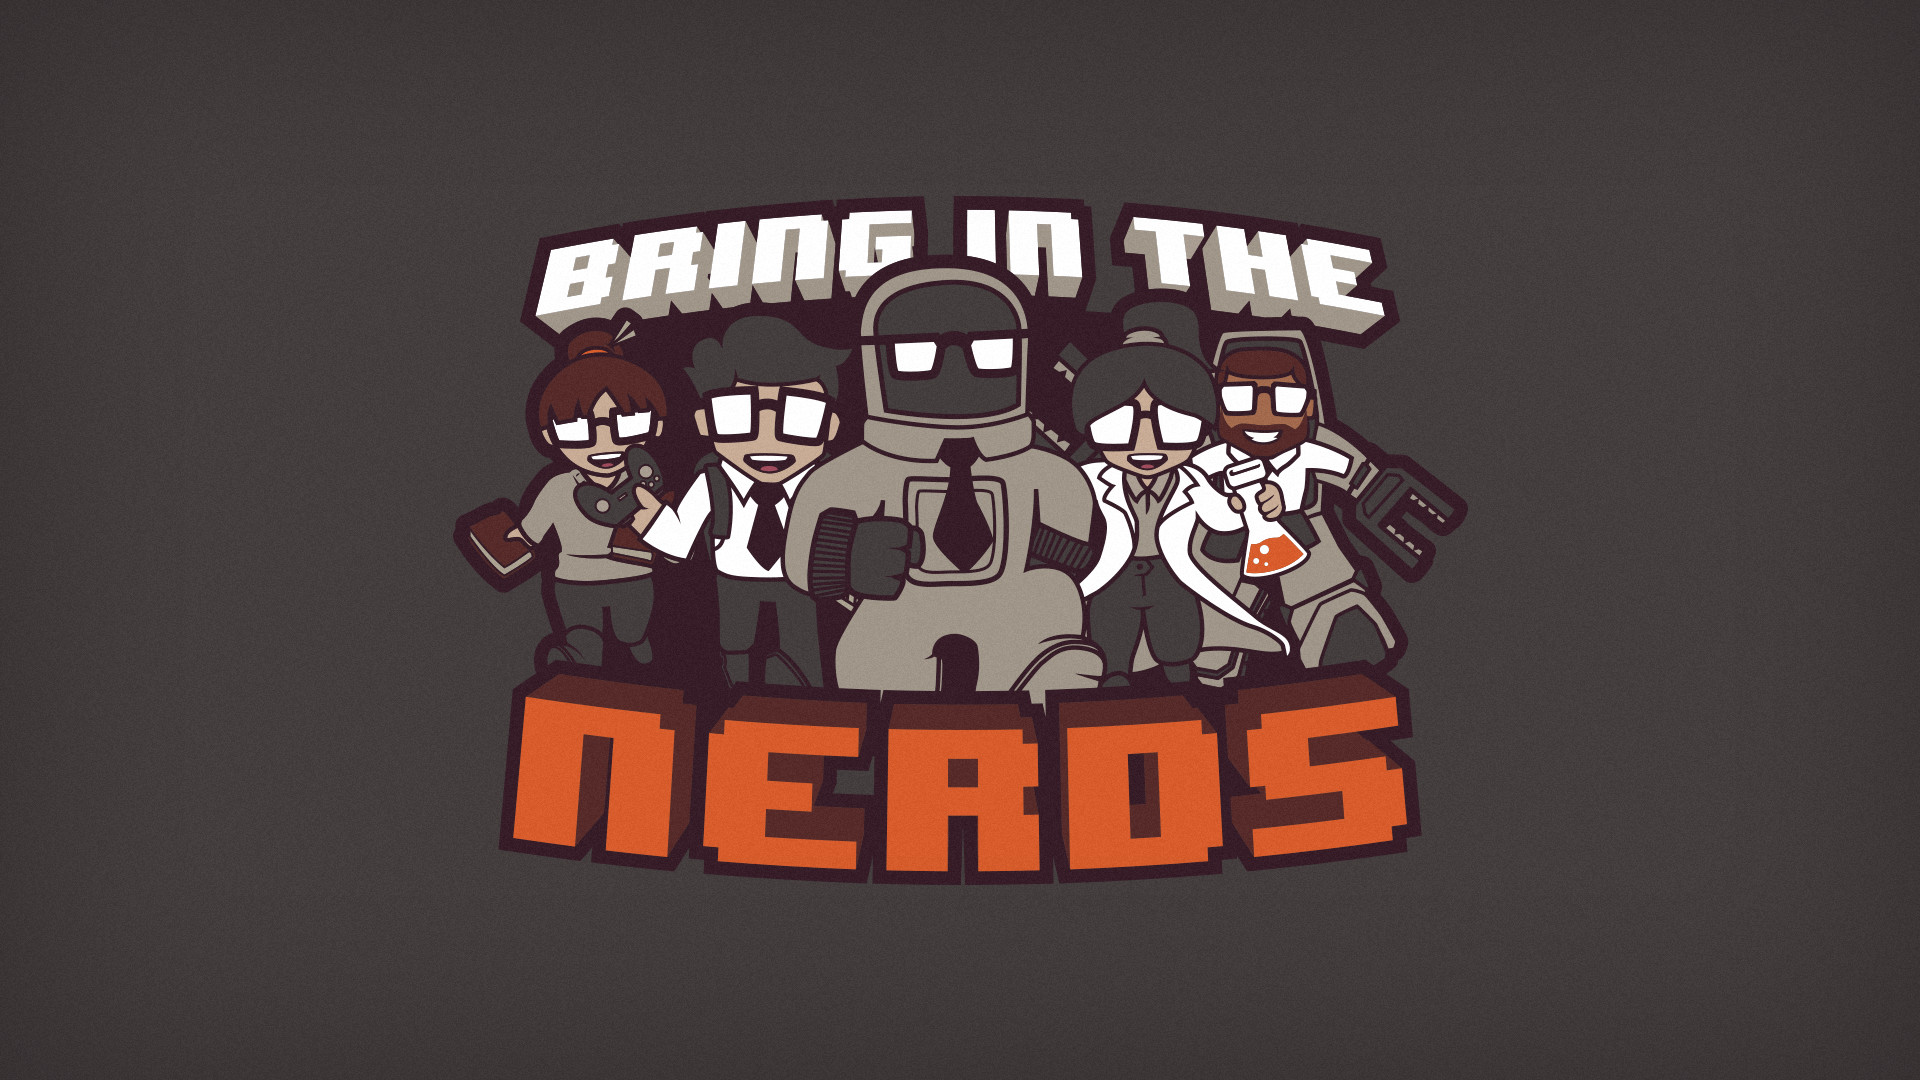 Bring in the nerds wallpaper edition by blo0p customization wallpaper